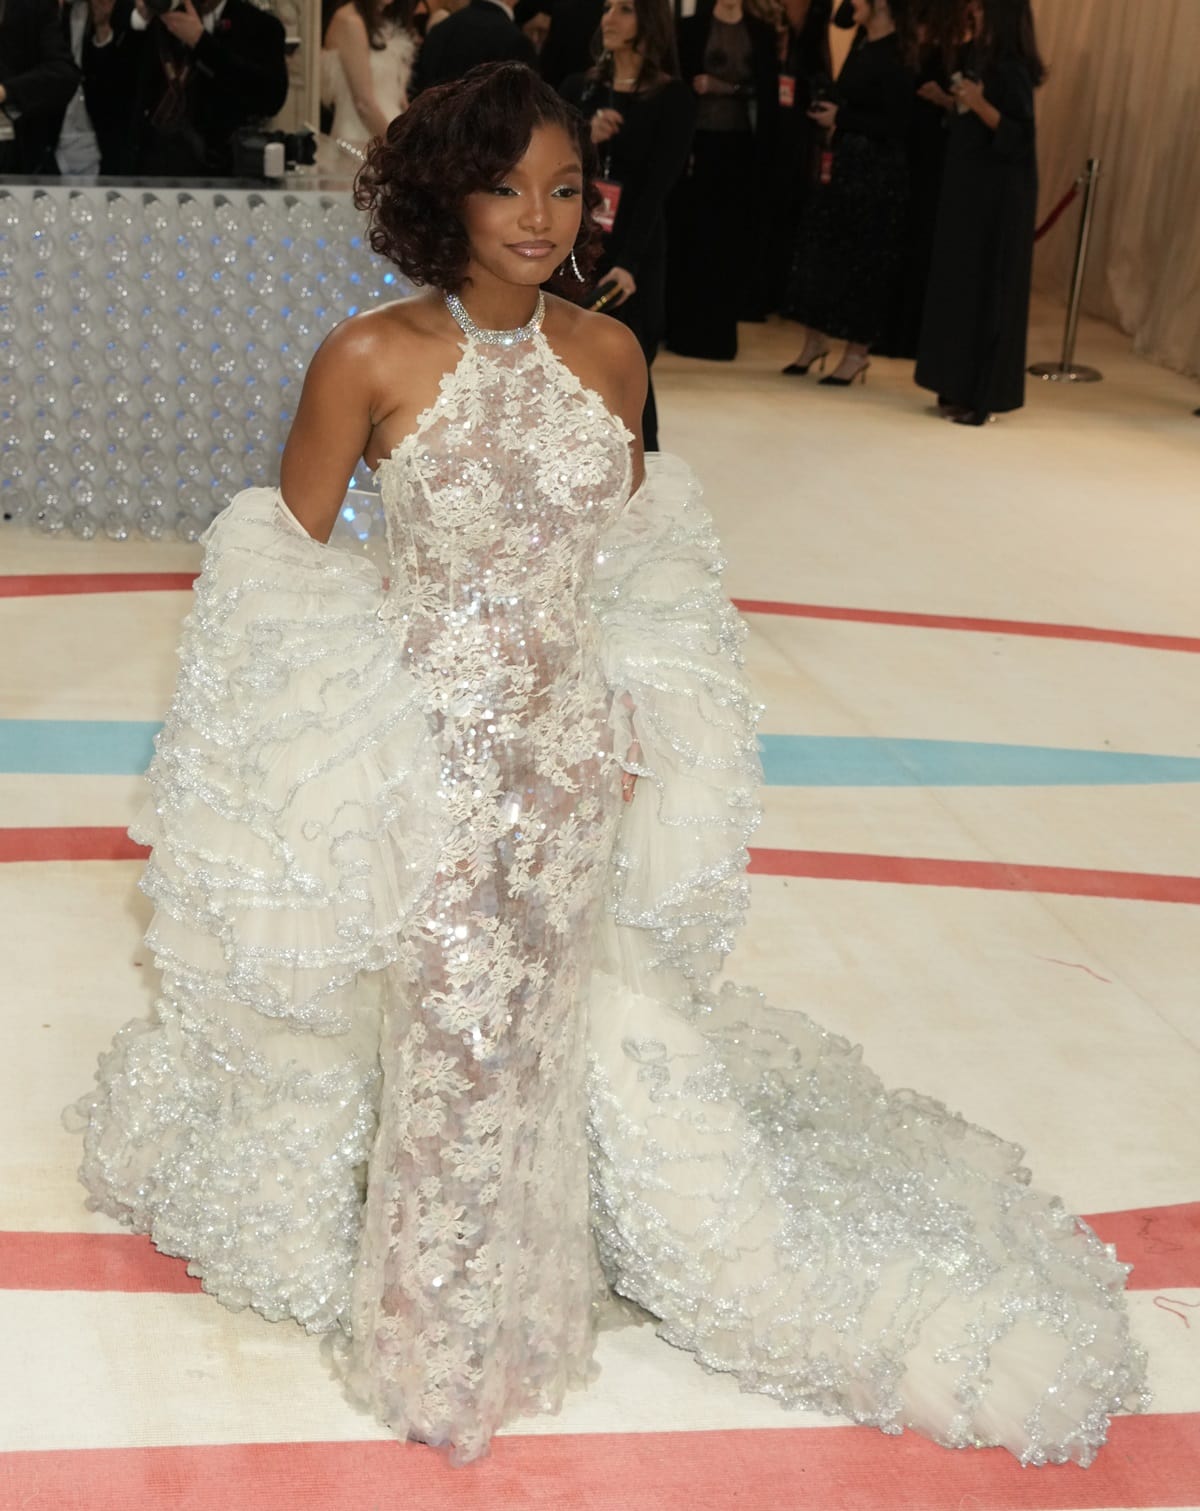 The intricate ruffles on Halle Bailey's cape resembled the tendrils of a frilly jellyfish, making the outfit even more captivating